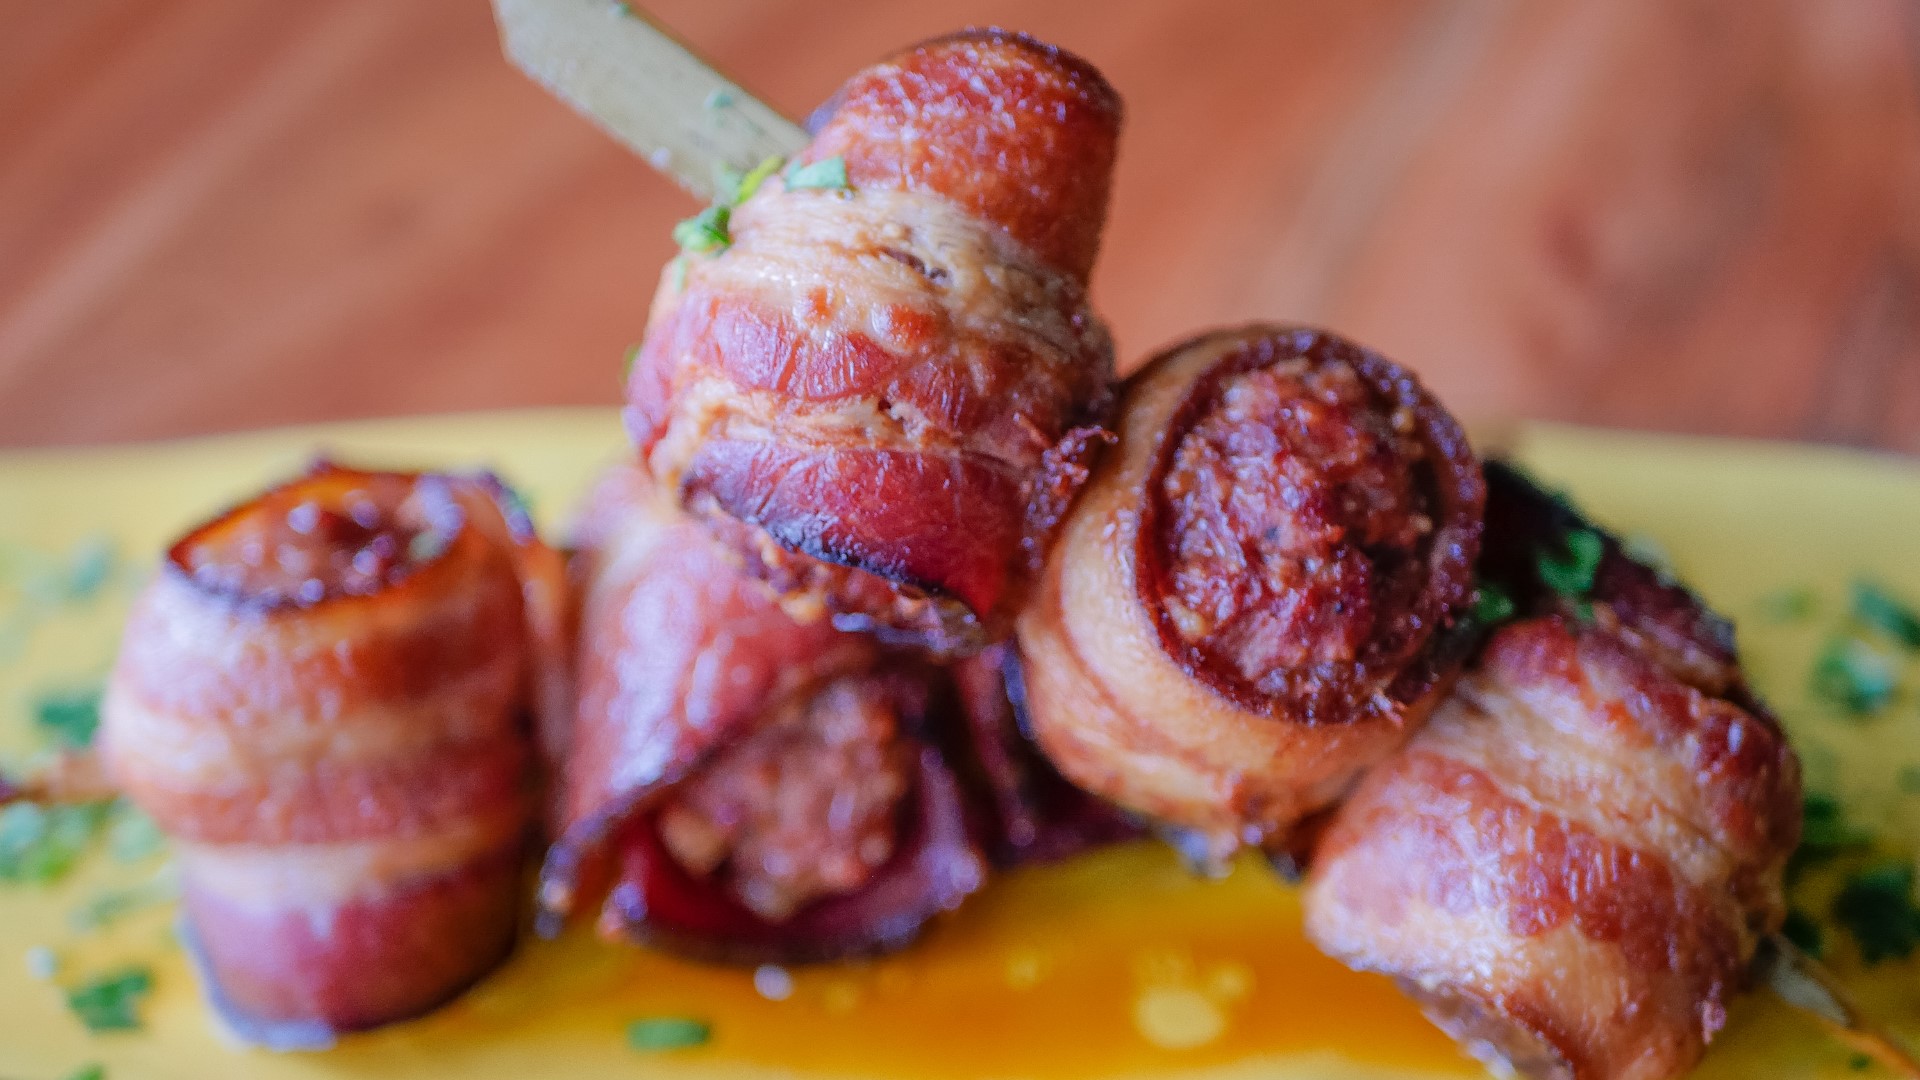 The Seahawks won't be playing but you can win your Super Bowl party with this famous bacon meatballs recipe. #k5evening